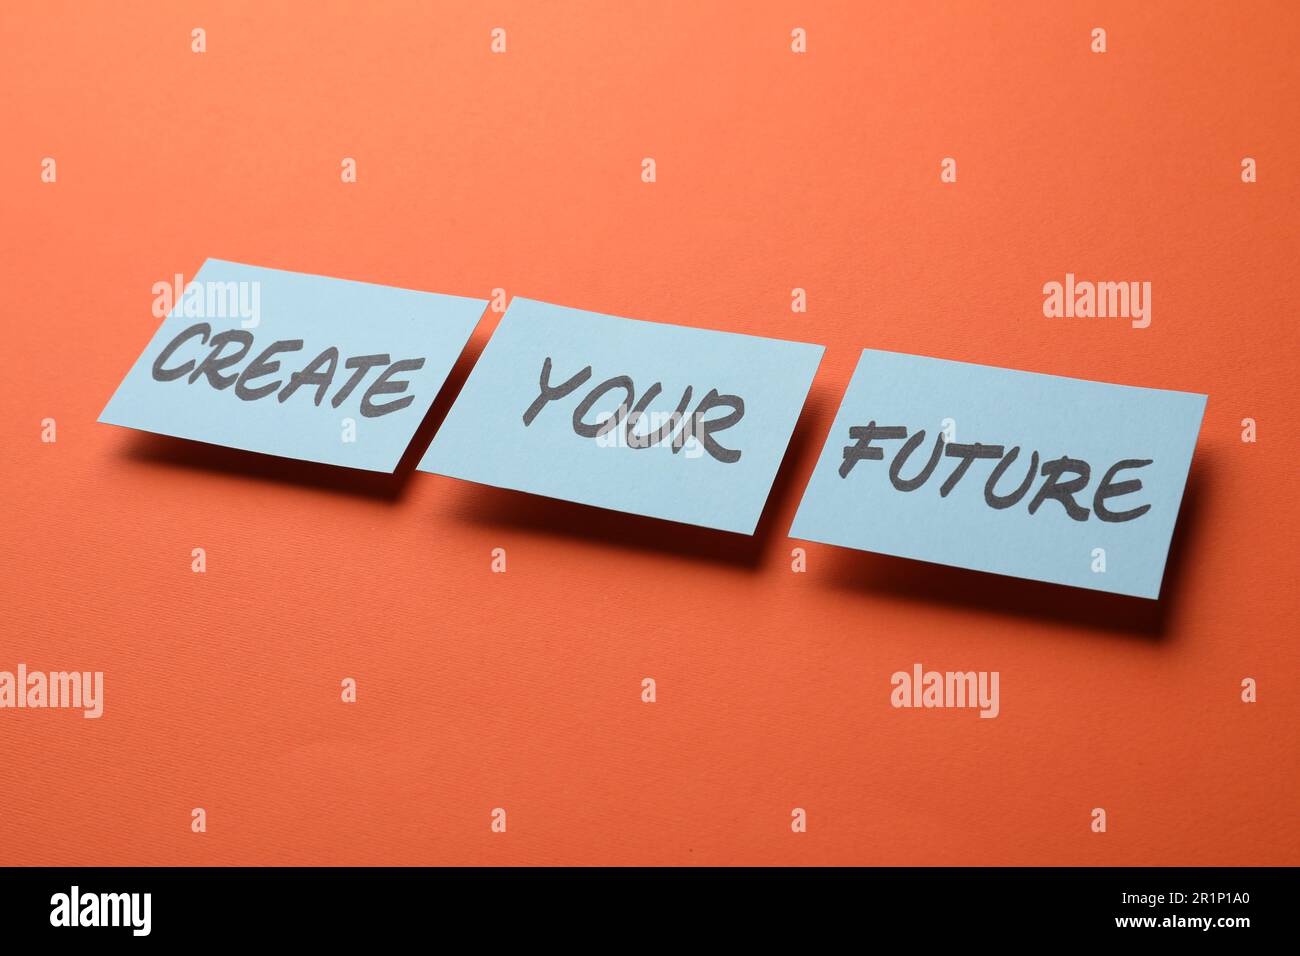 Motivational phrase Create Your Future made of sticky notes with words on orange background Stock Photo